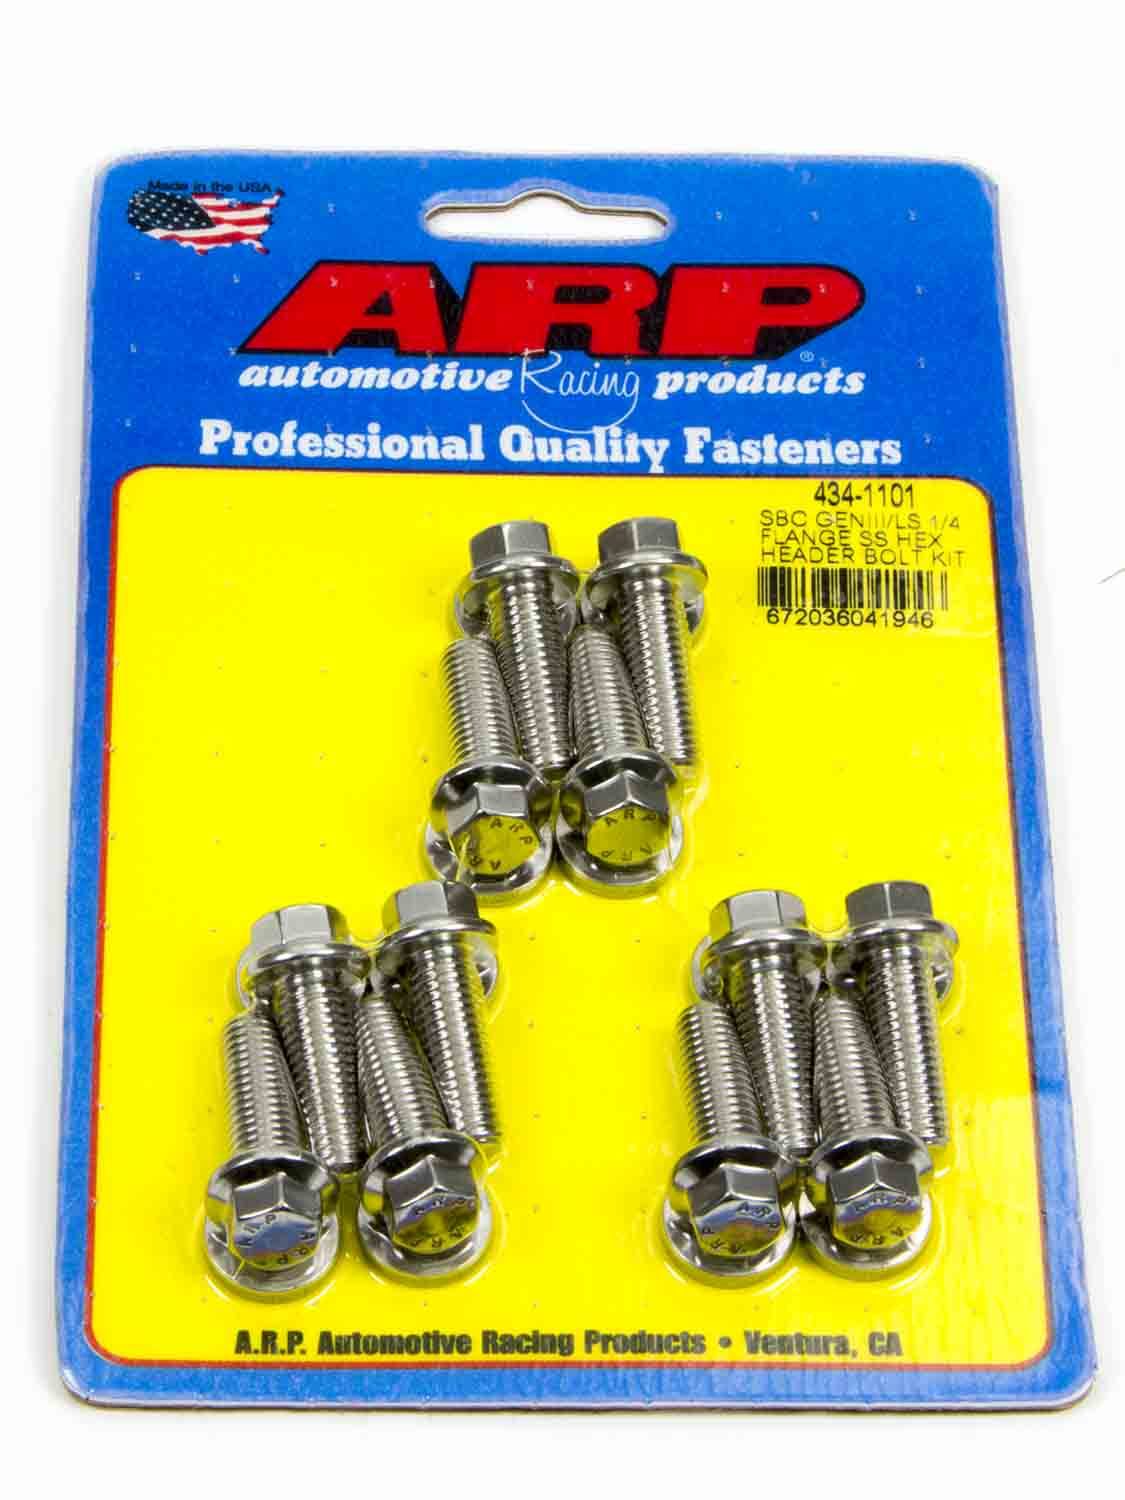 ARP 434-1101 Header Bolt, 8 mm x 1.25 Thread, 0.984 in Long, Hex Head, Stainless, Polished, GM LS-Series, Set of 12